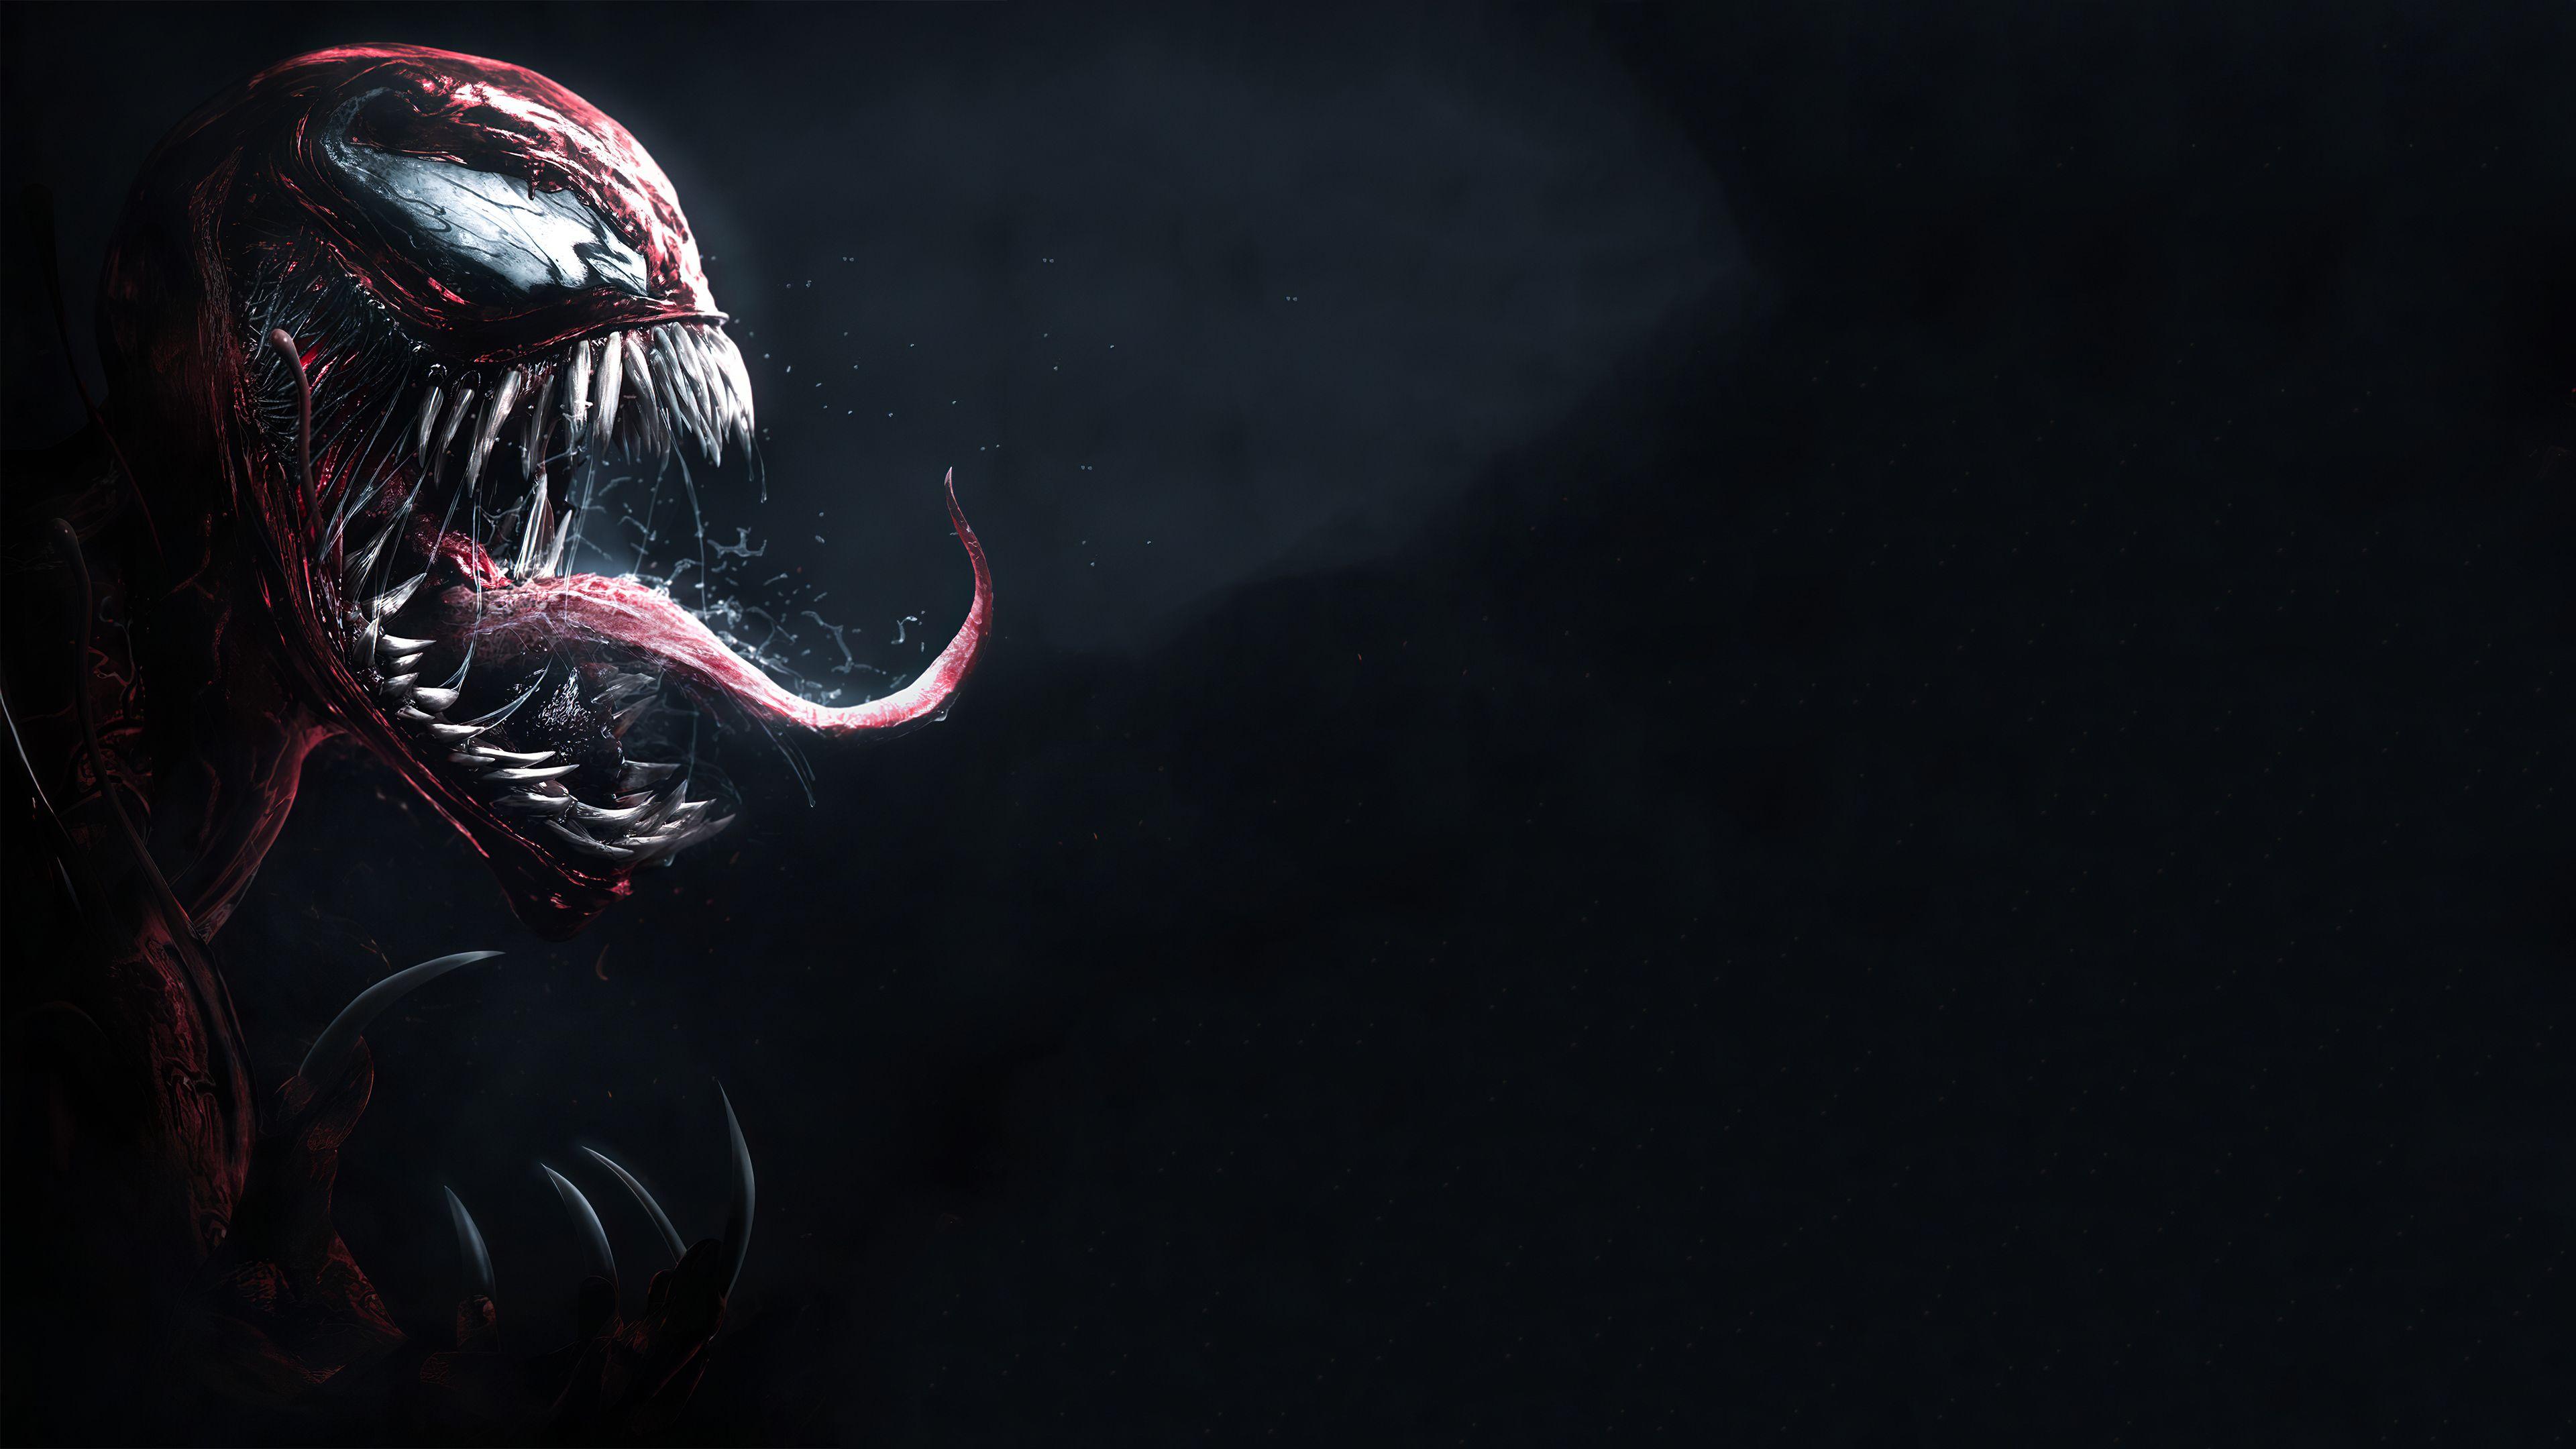 Carnage 4K Wallpapers  HD Wallpapers  ID 24204